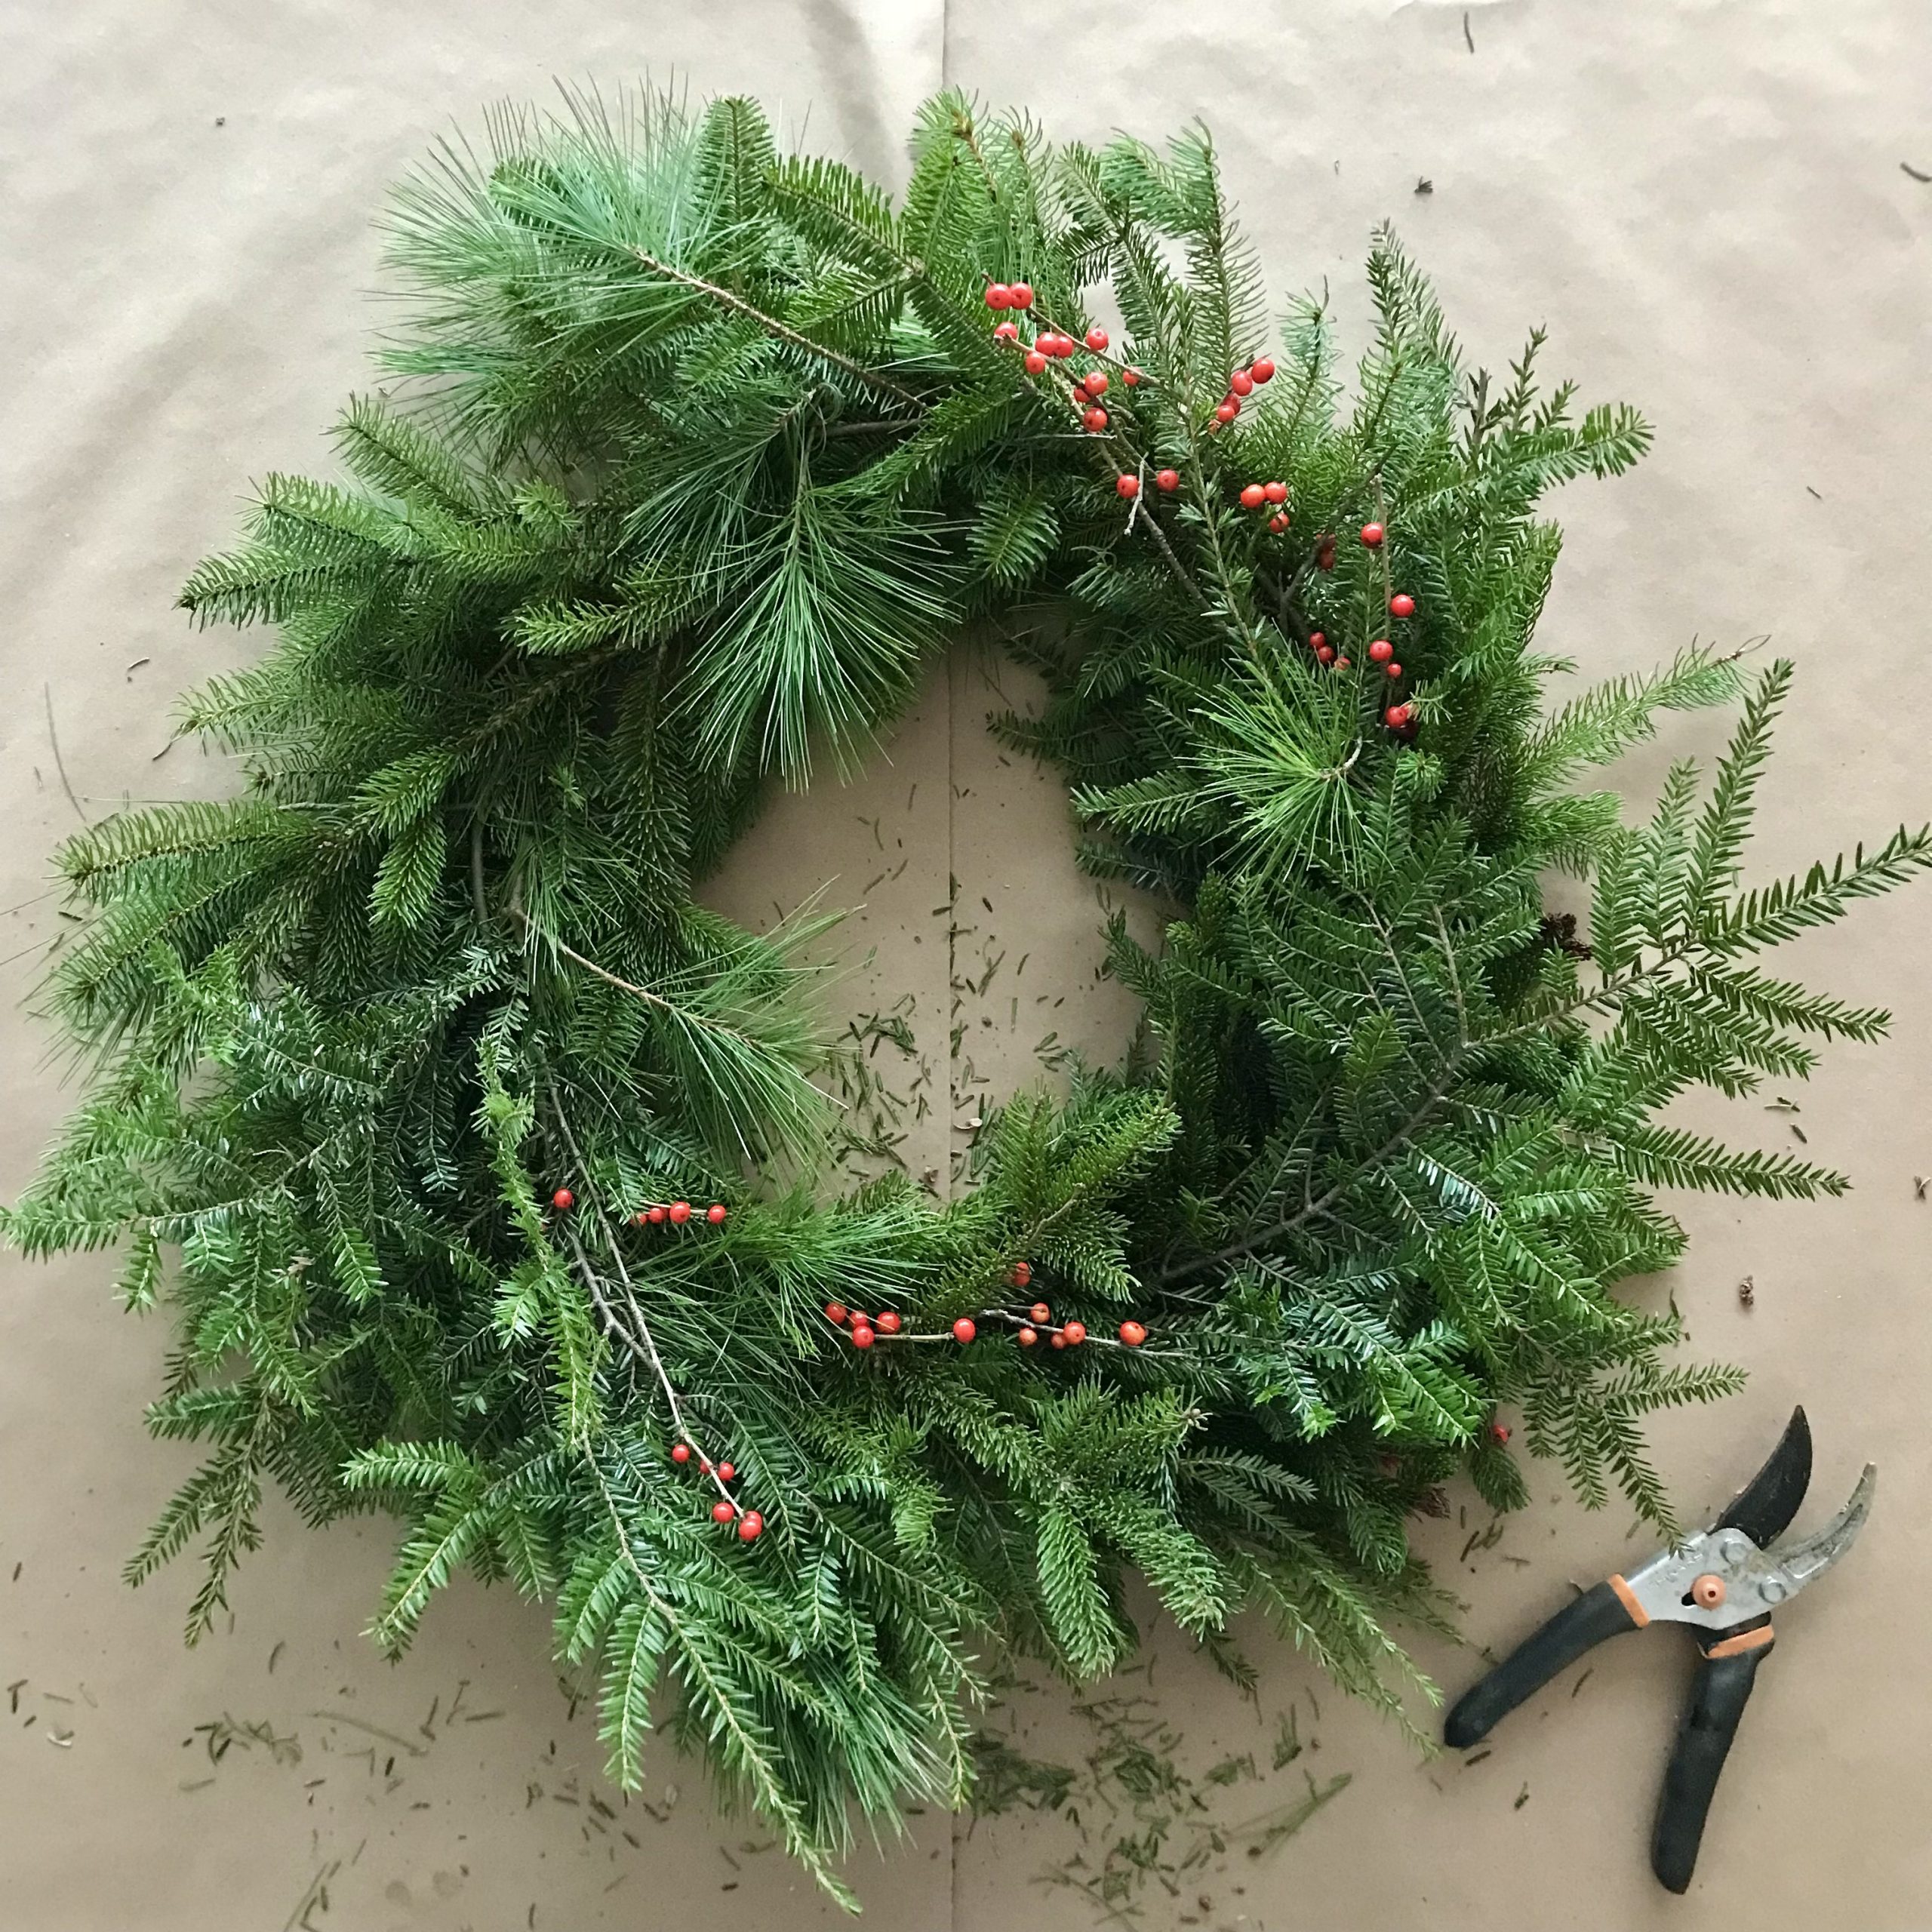 Gathering Greens And Making Wreaths